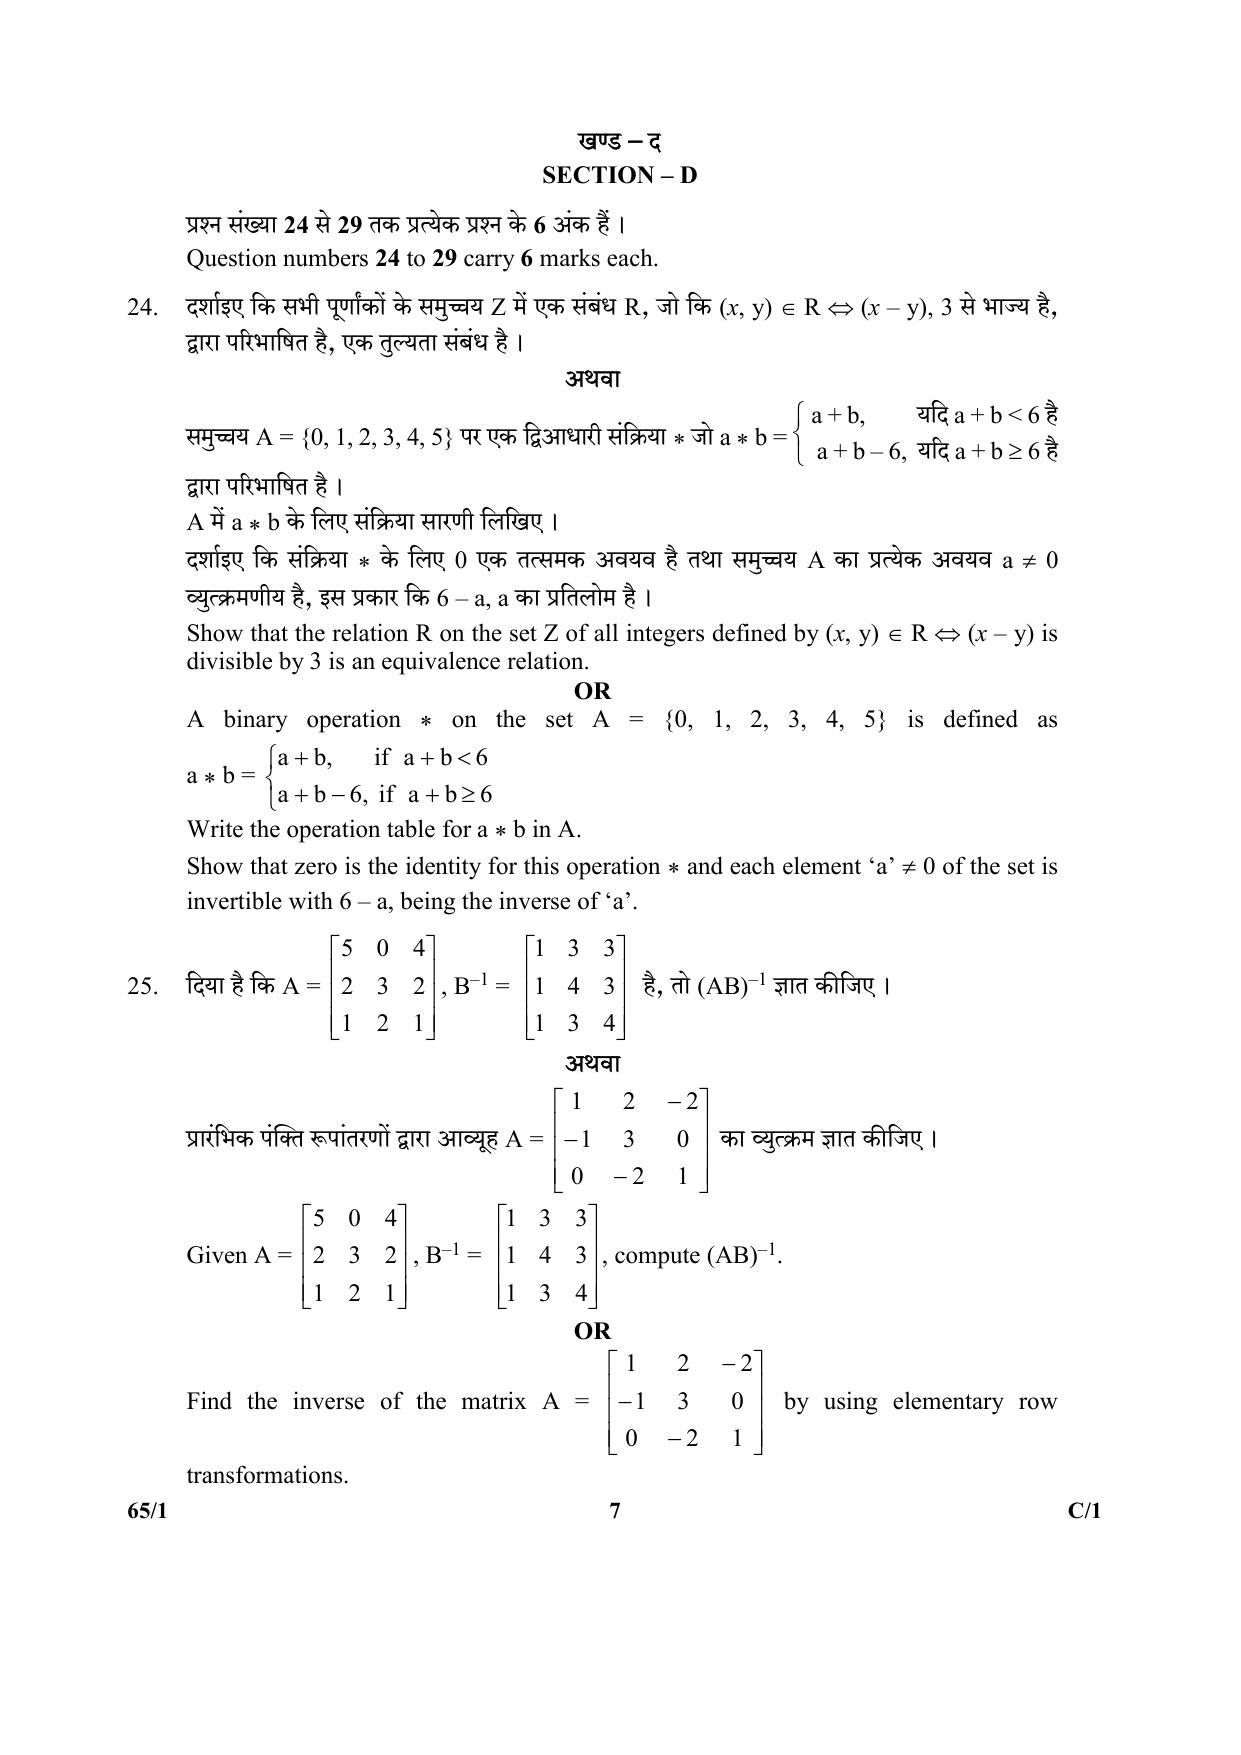 CBSE Class 12 65-1 (Mathematics) 2018 Compartment Question Paper - Page 7